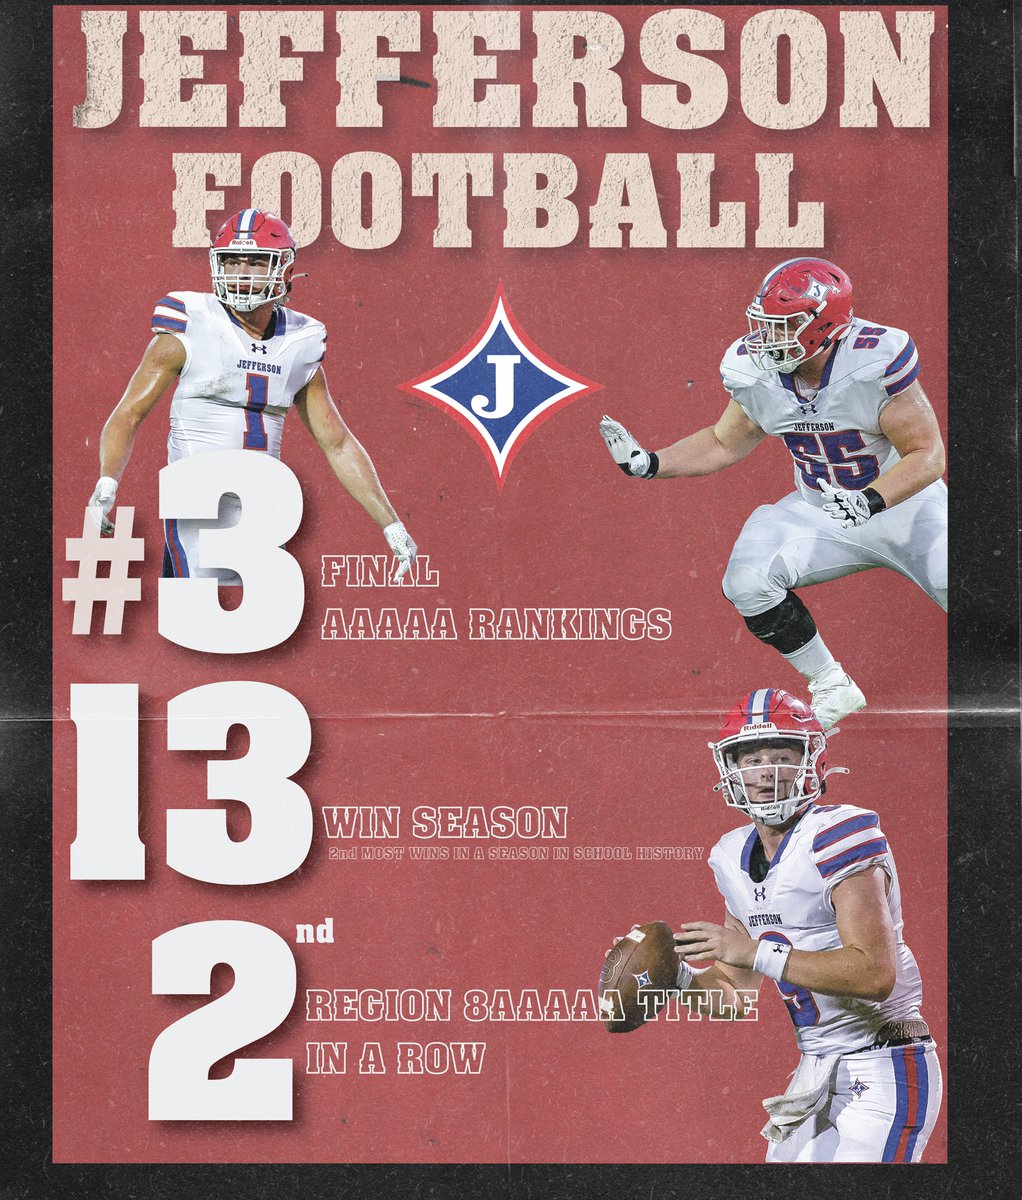 Numbers don’t lie.

Amazing season Dragons!

#JeffersonMade